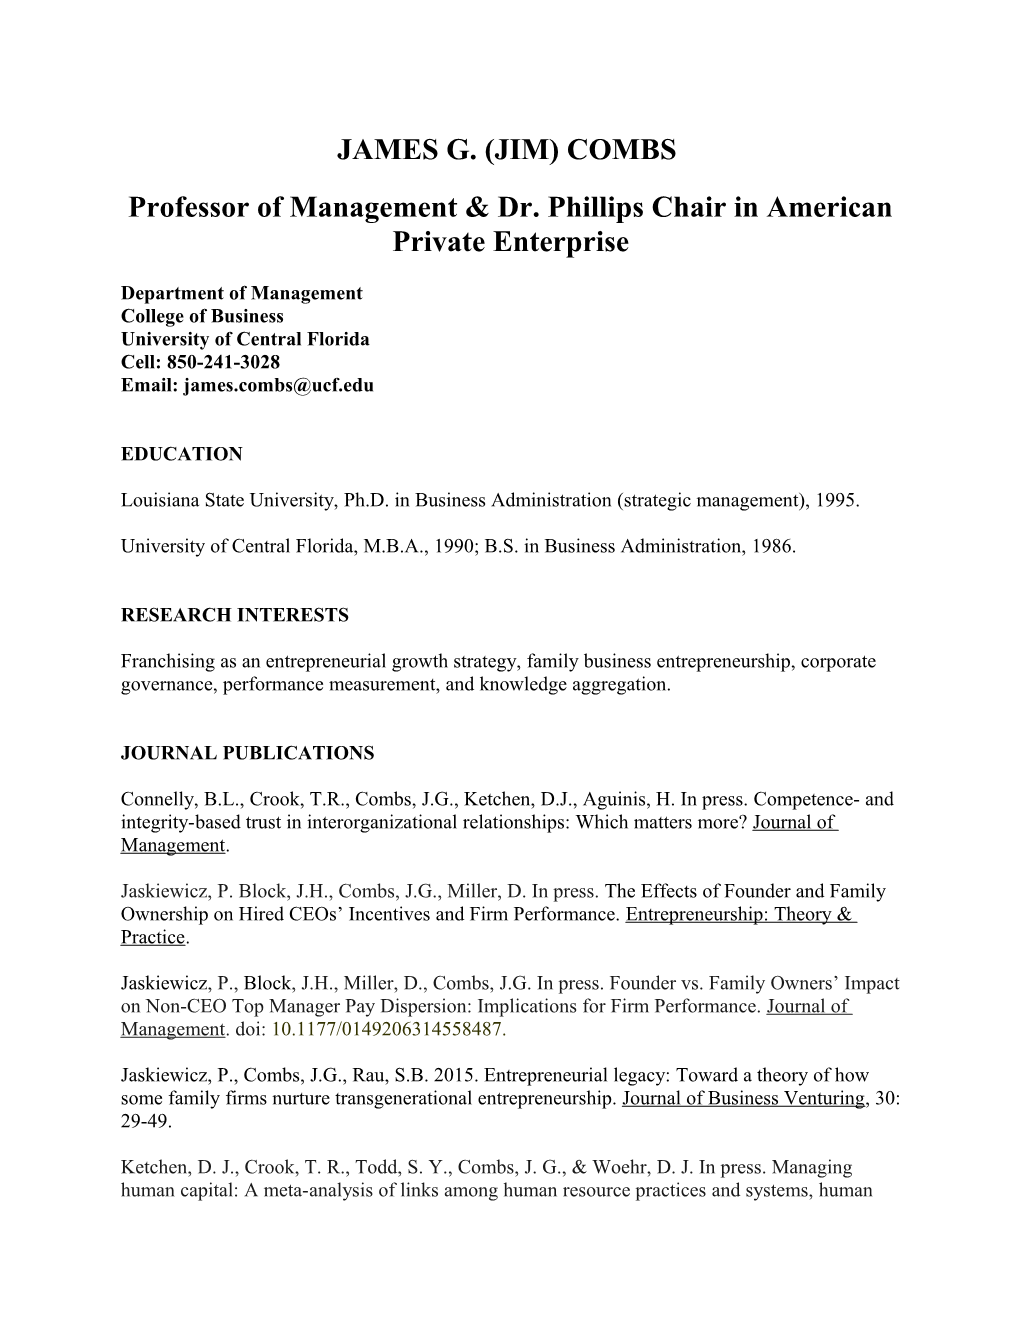 Professor of Management & Dr. Phillips Chair in American Private Enterprise